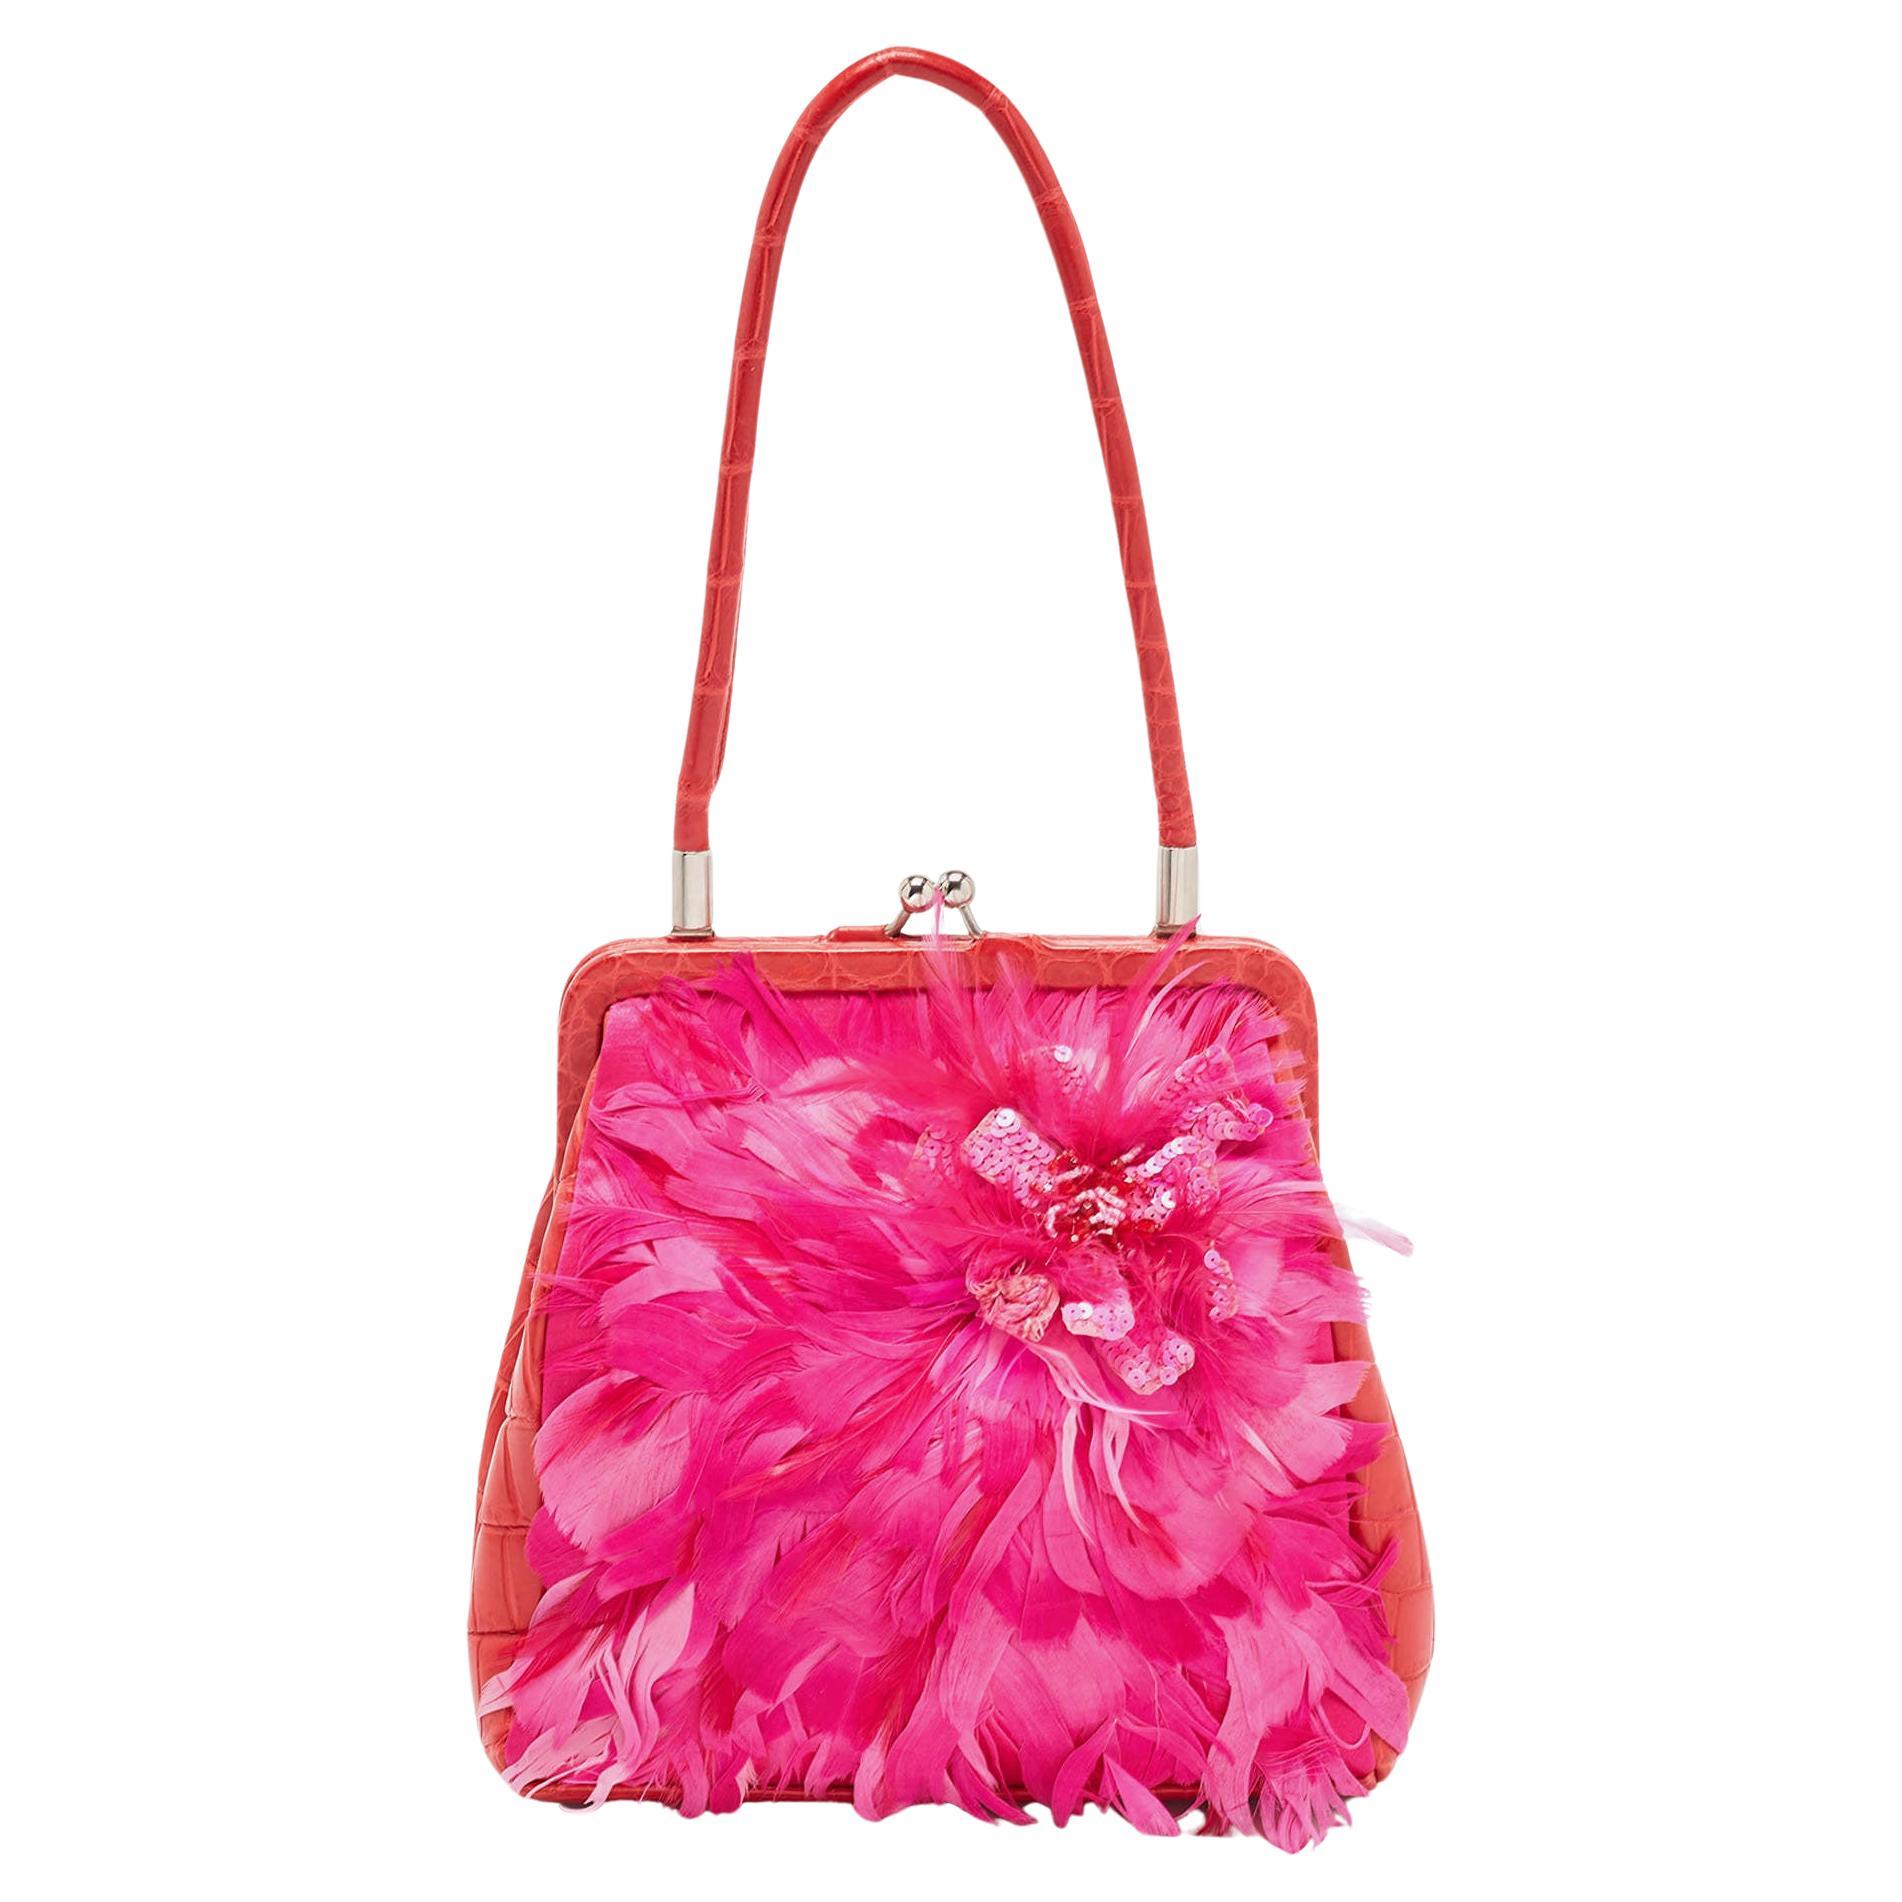 Gianfranco Ferre Red/Magenta Crocodile and Feather Top Handle Bag For Sale